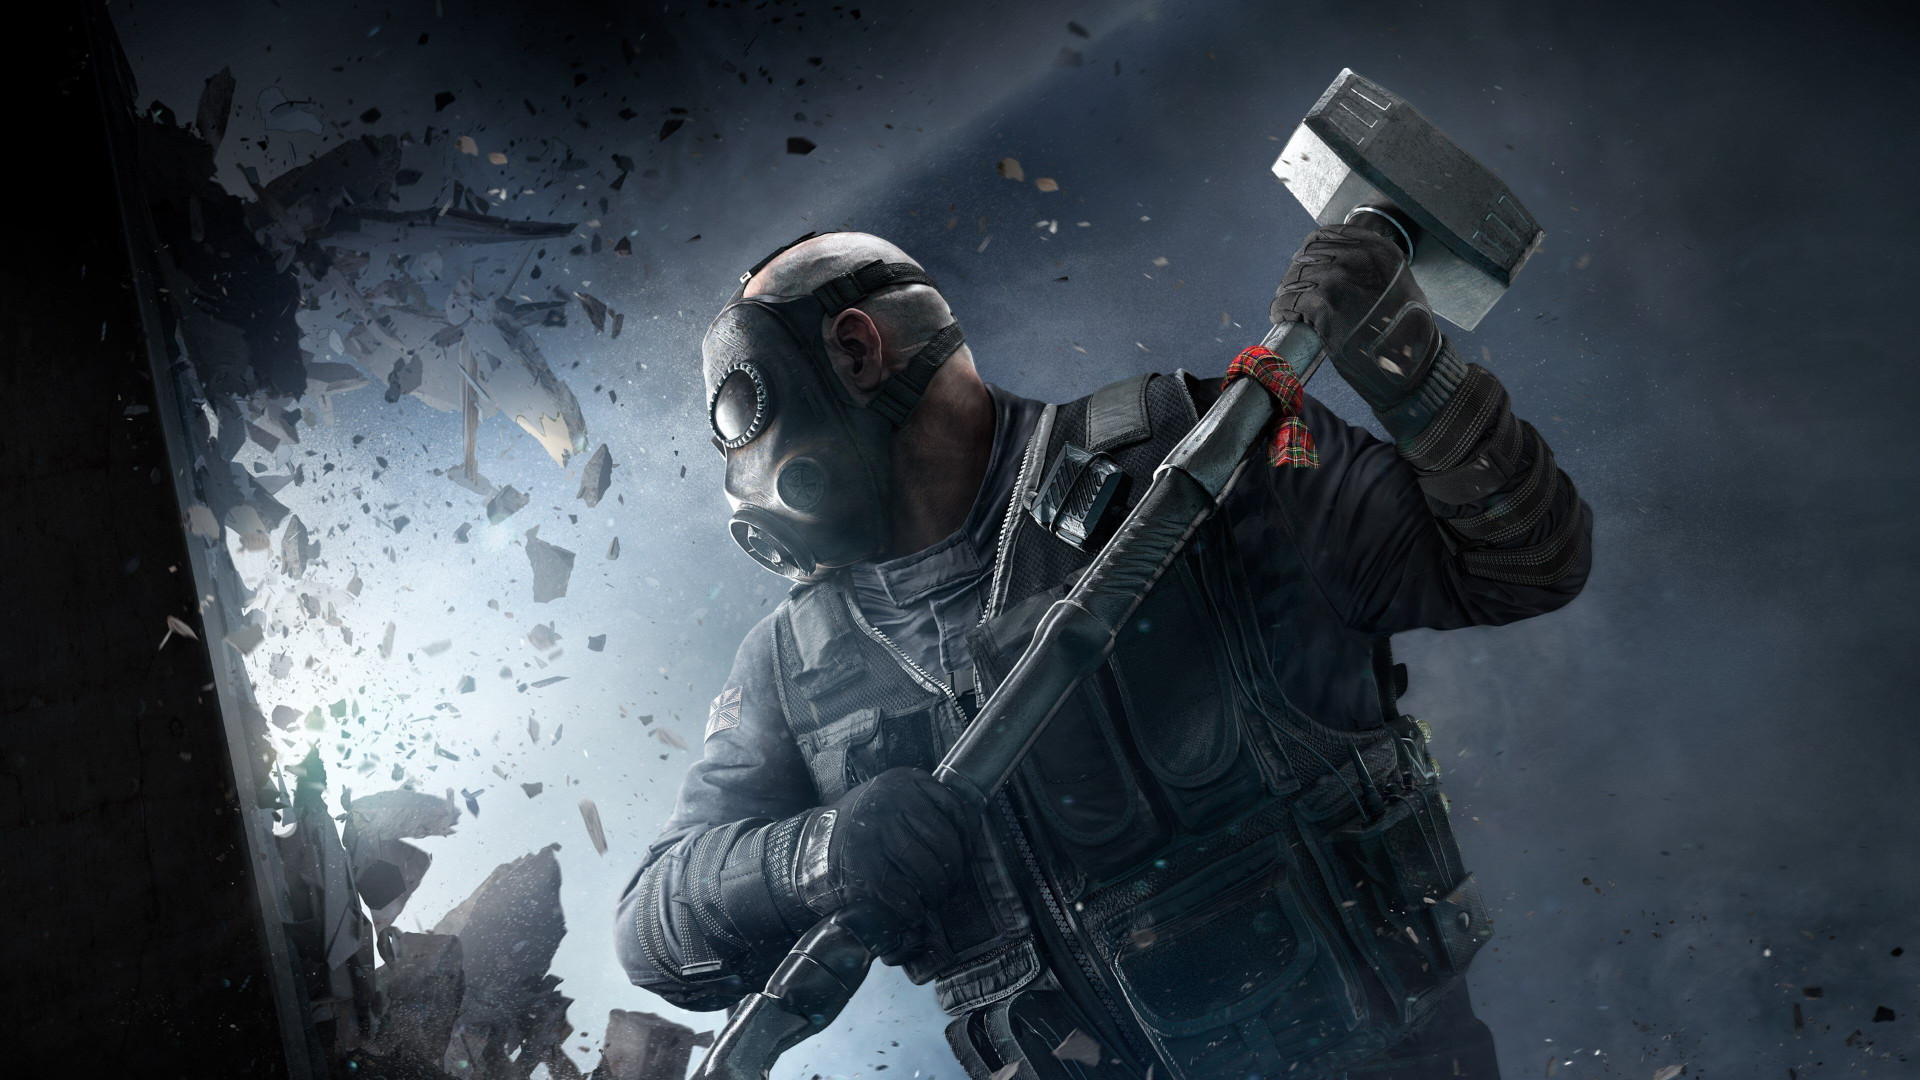 Rainbow Six Siege crossplay: A soldier with a big sledgehammer above his head smashes through a wall.